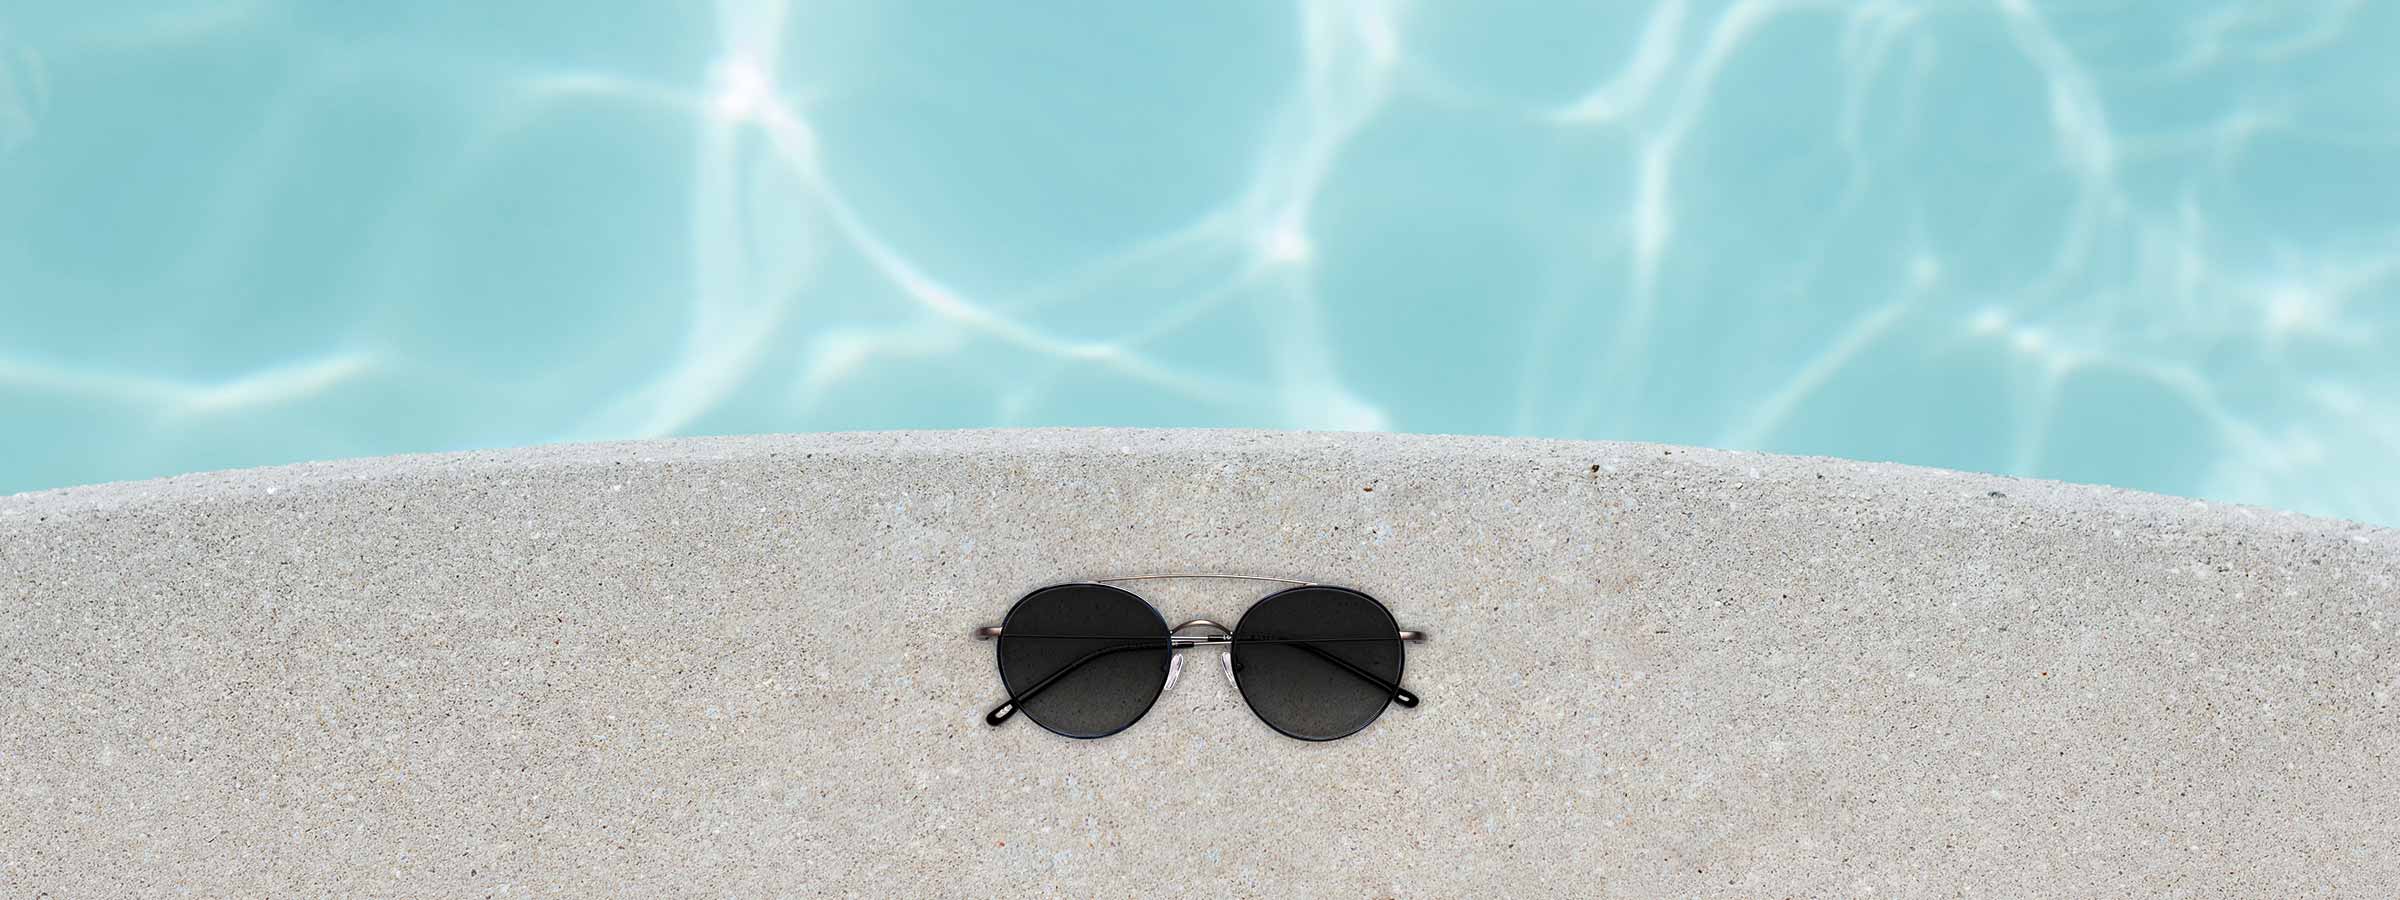 A pair of sunglasses by the side of a swimming pool